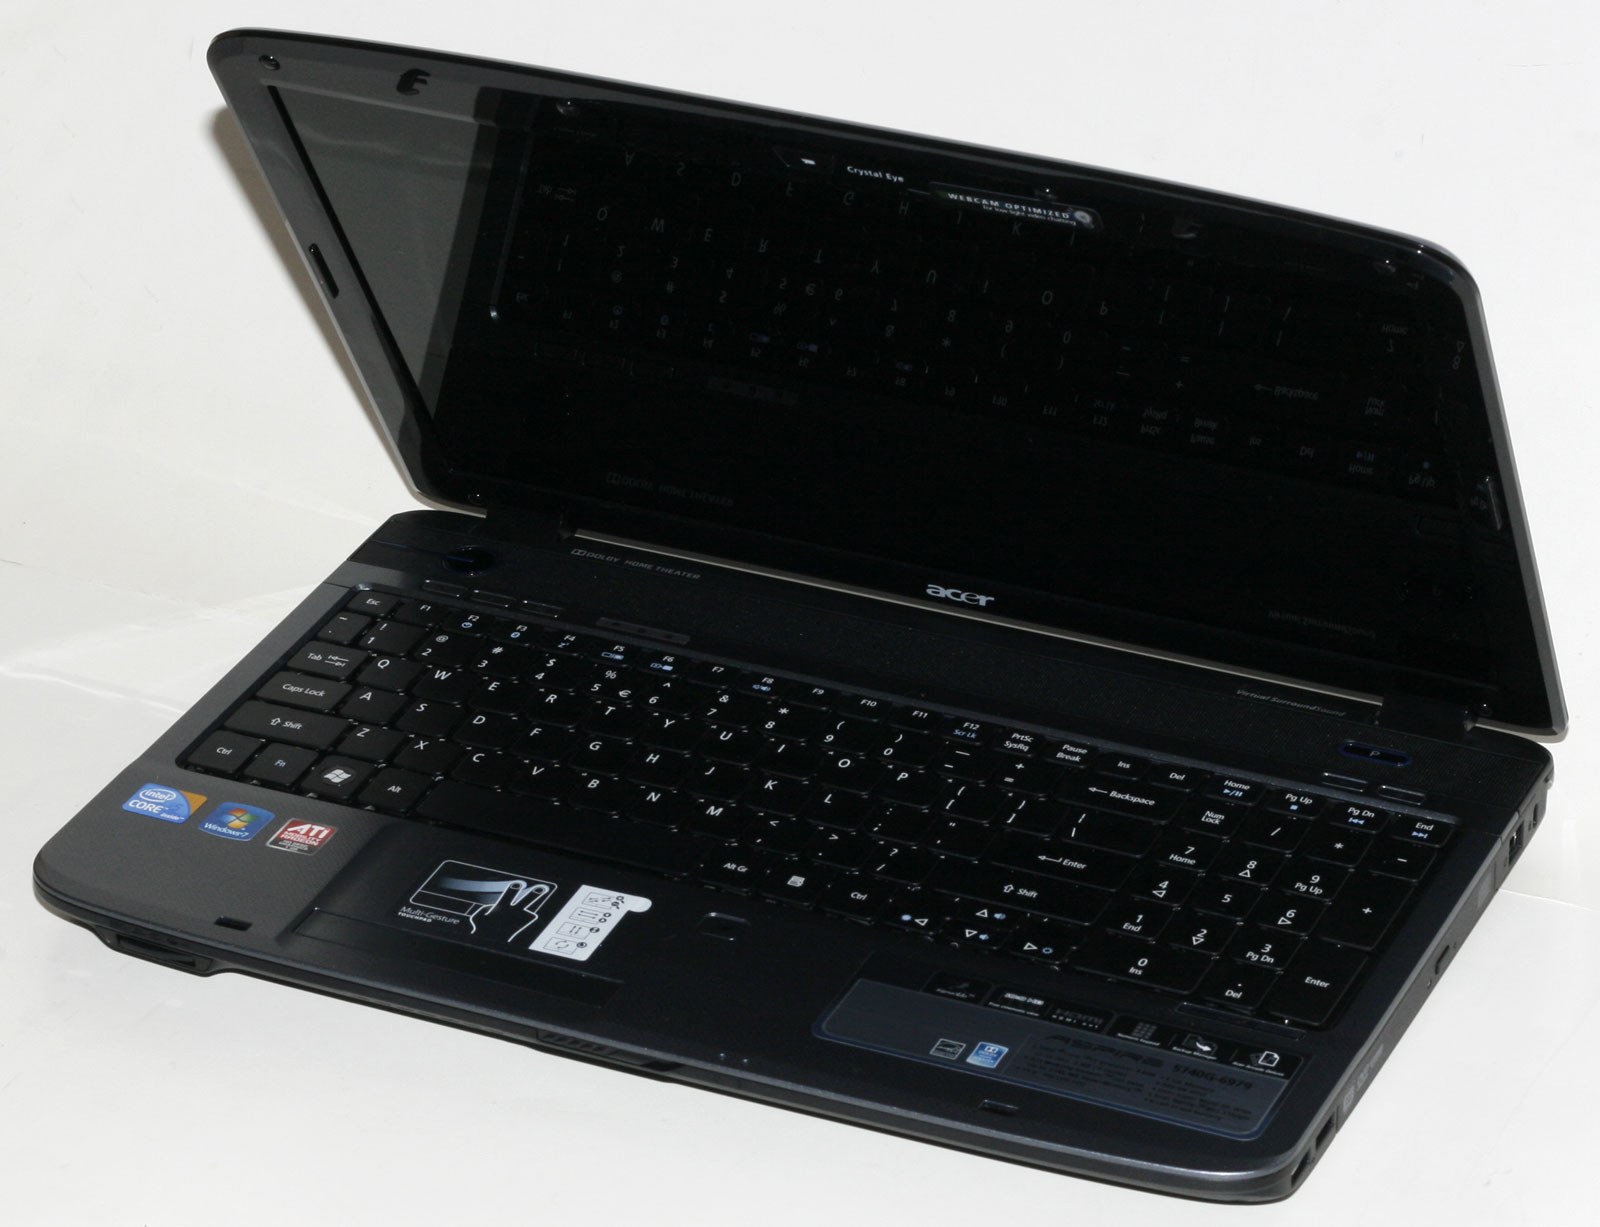 Acer Aspire AS5740G-6979: Budget Priced Great Gaming